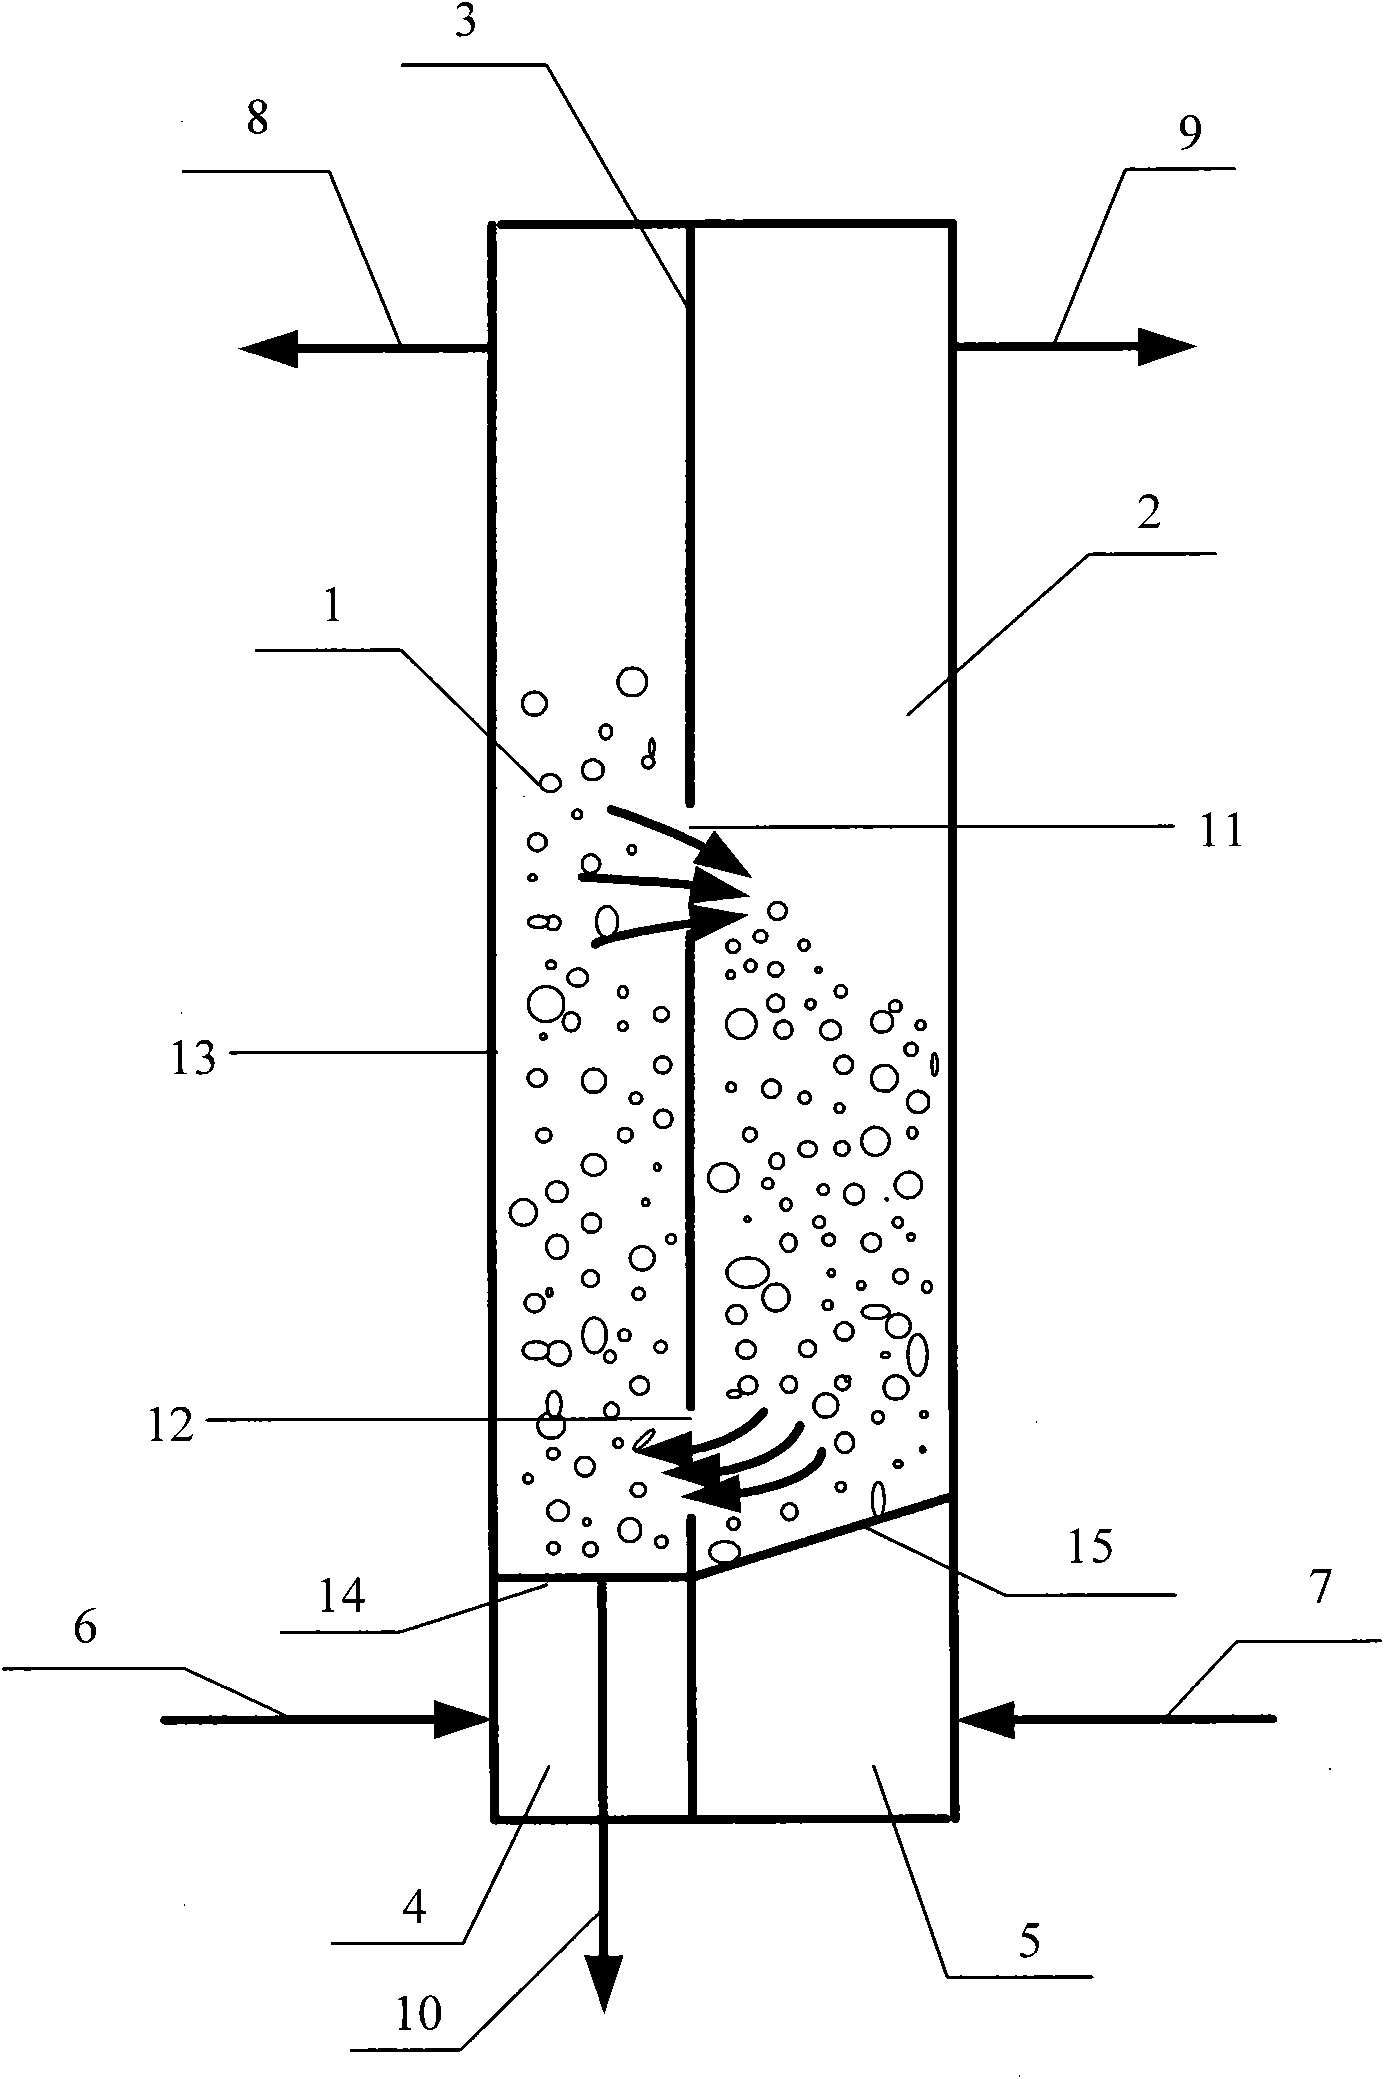 Chemical-looping combustion system of parallel fluidized bed